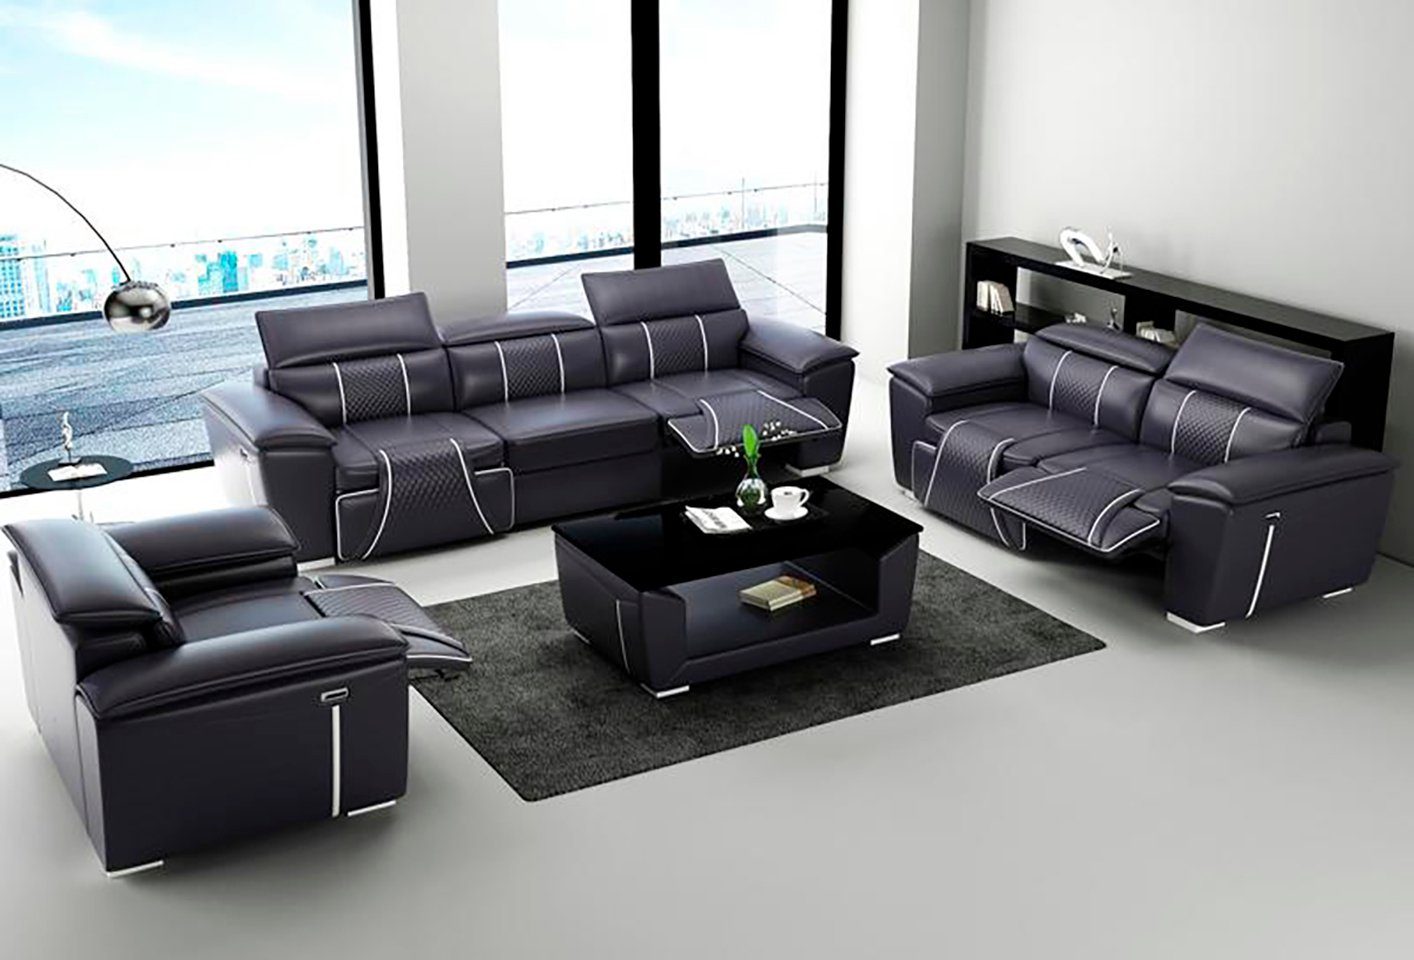 3+2+1 Relax Multifunktions Europe in Sofa Couch Sitzer, Sofagarnitur Made JVmoebel Sofa Polster